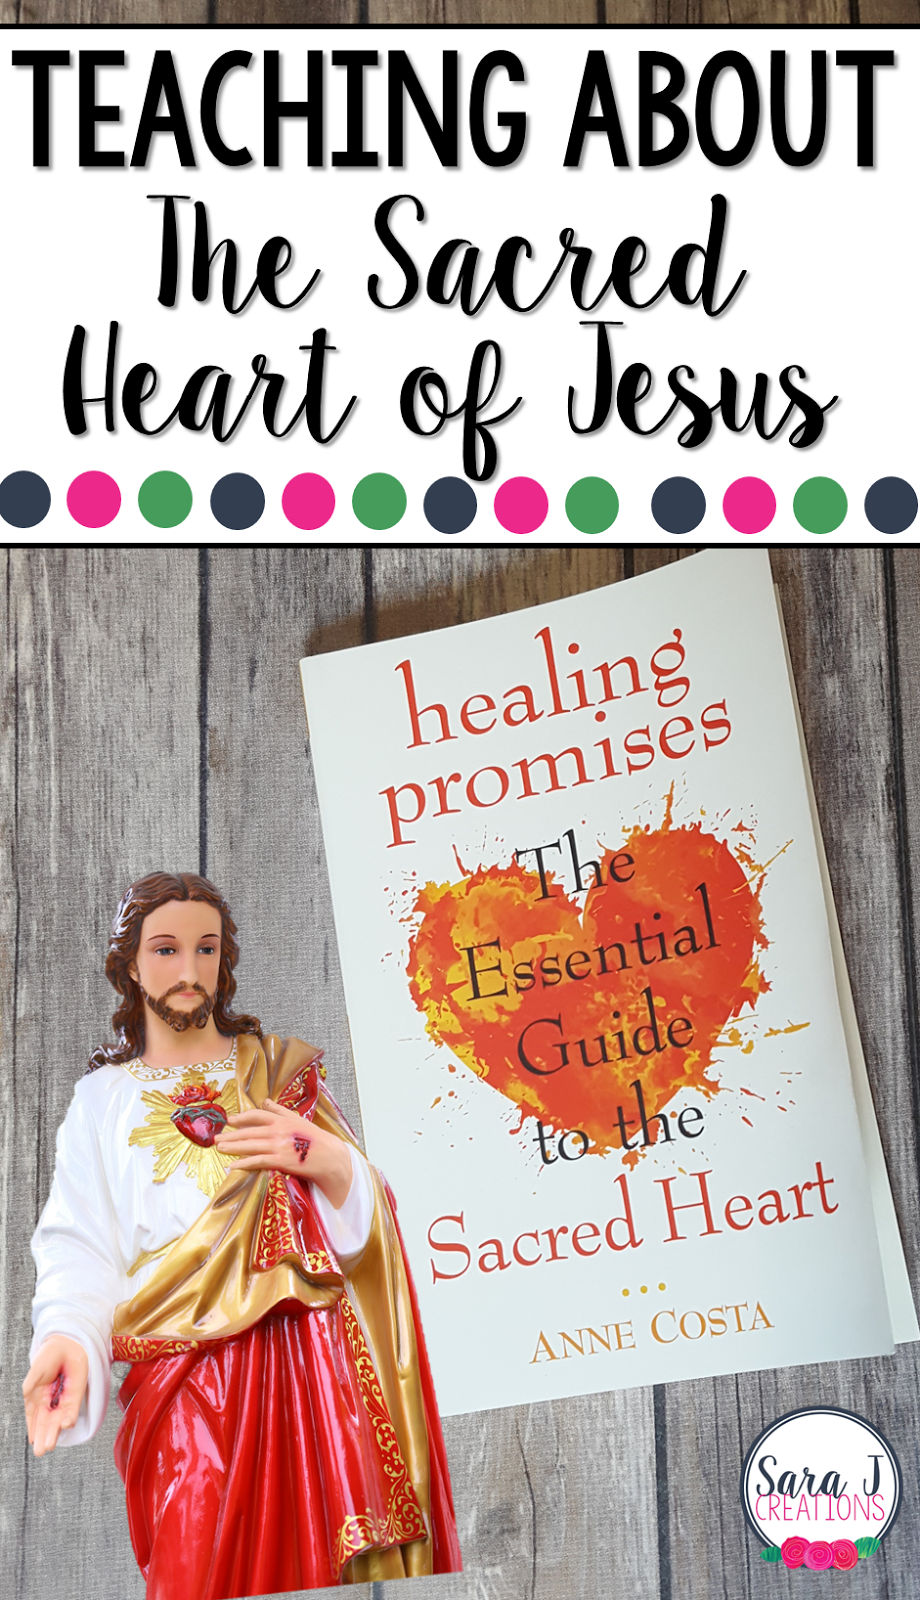 Tips for teaching students about the Sacred Heart of Jesus. Also includes a review of Healing Promises: An Essential Guide to the Sacred Heart